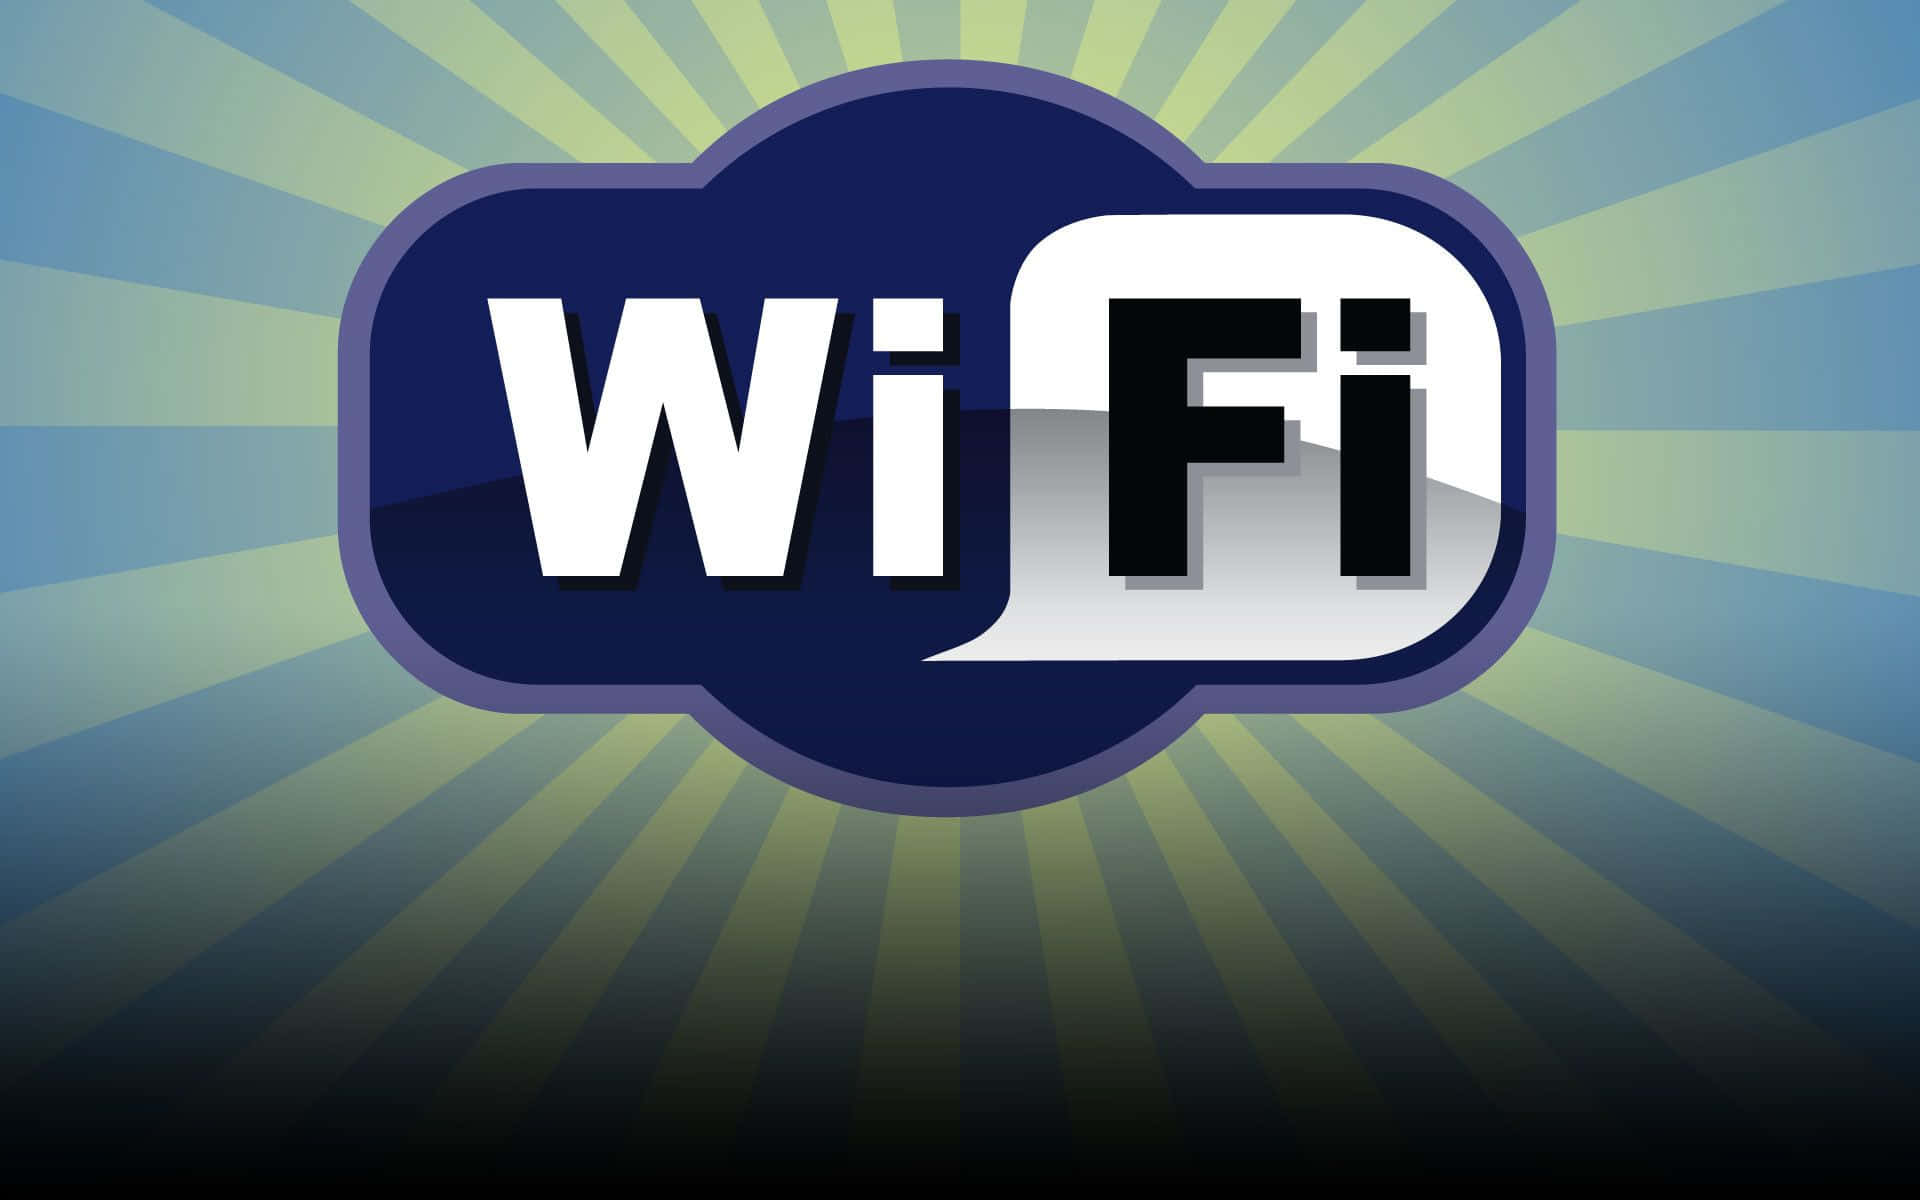 Always stay connected with fast and reliable WiFi Wallpaper